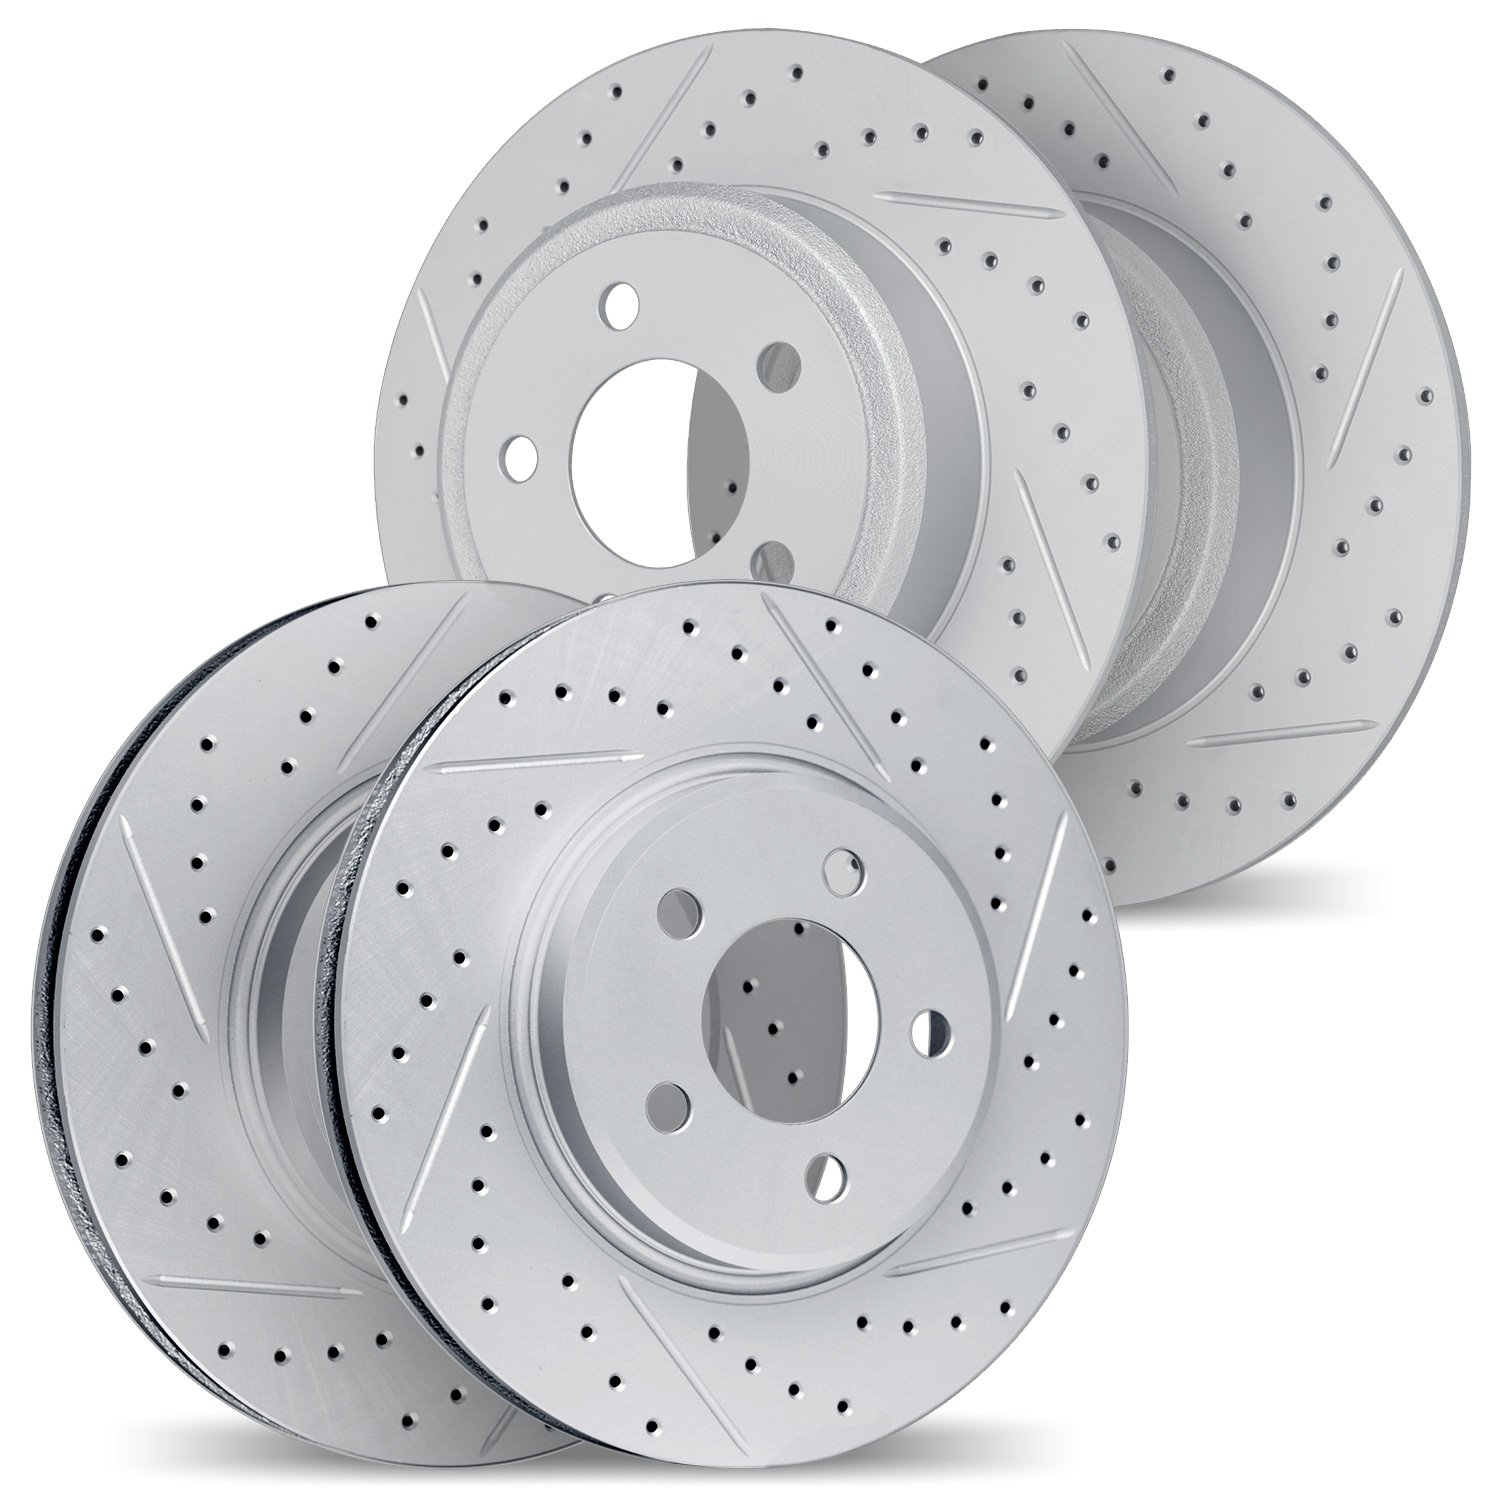 2004-59033 Geoperformance Drilled/Slotted Brake Rotors, Fits Select Acura/Honda, Position: Front and Rear